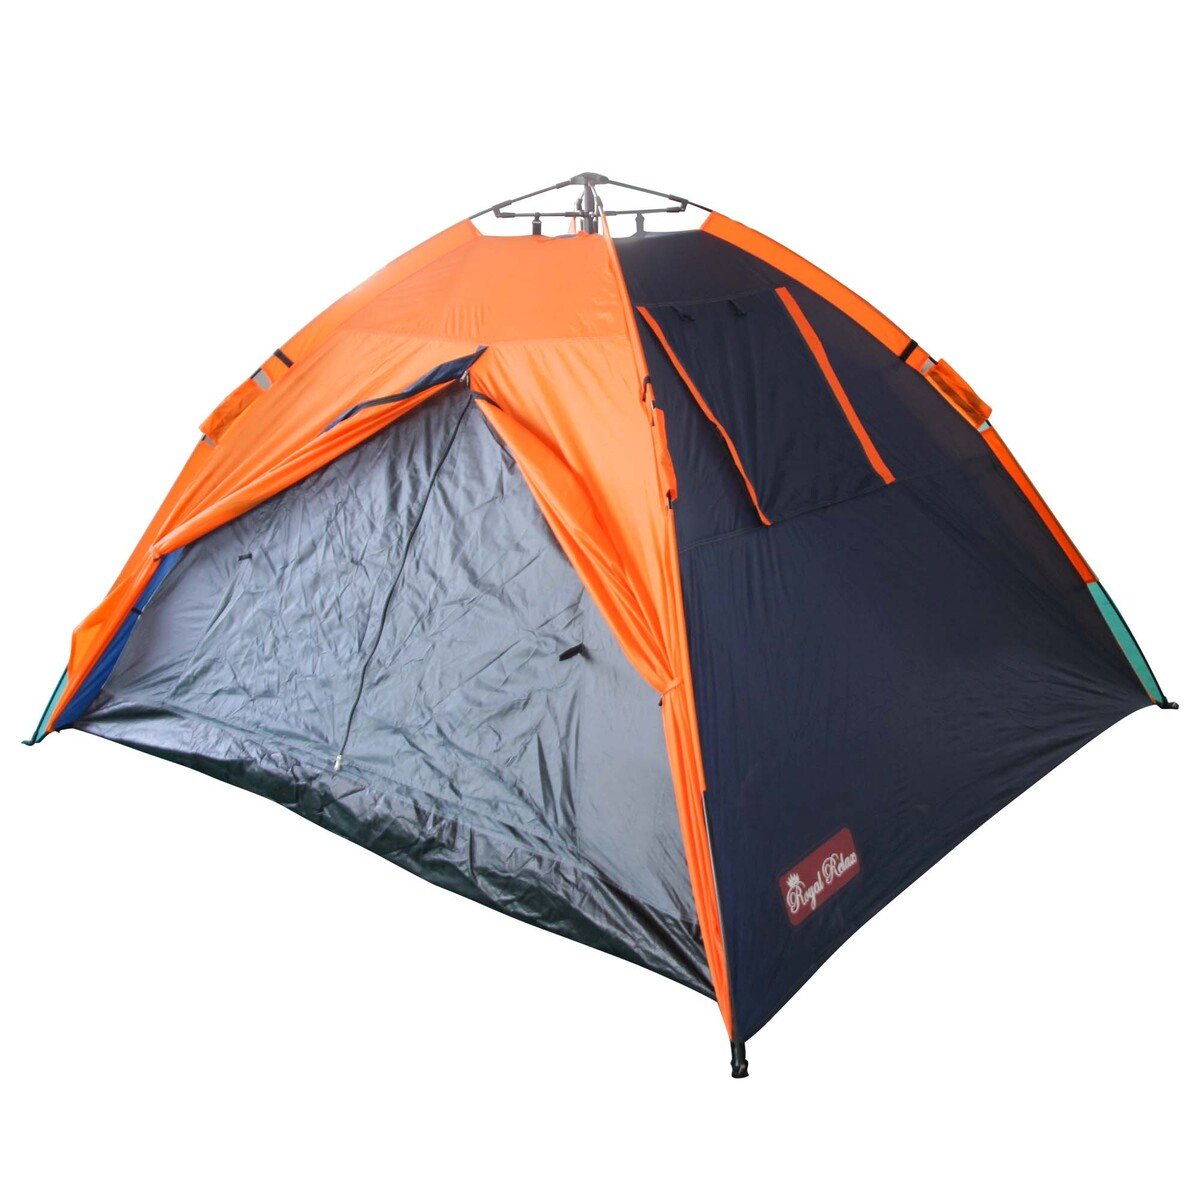 Relax Camping Tent, Black, CT18103